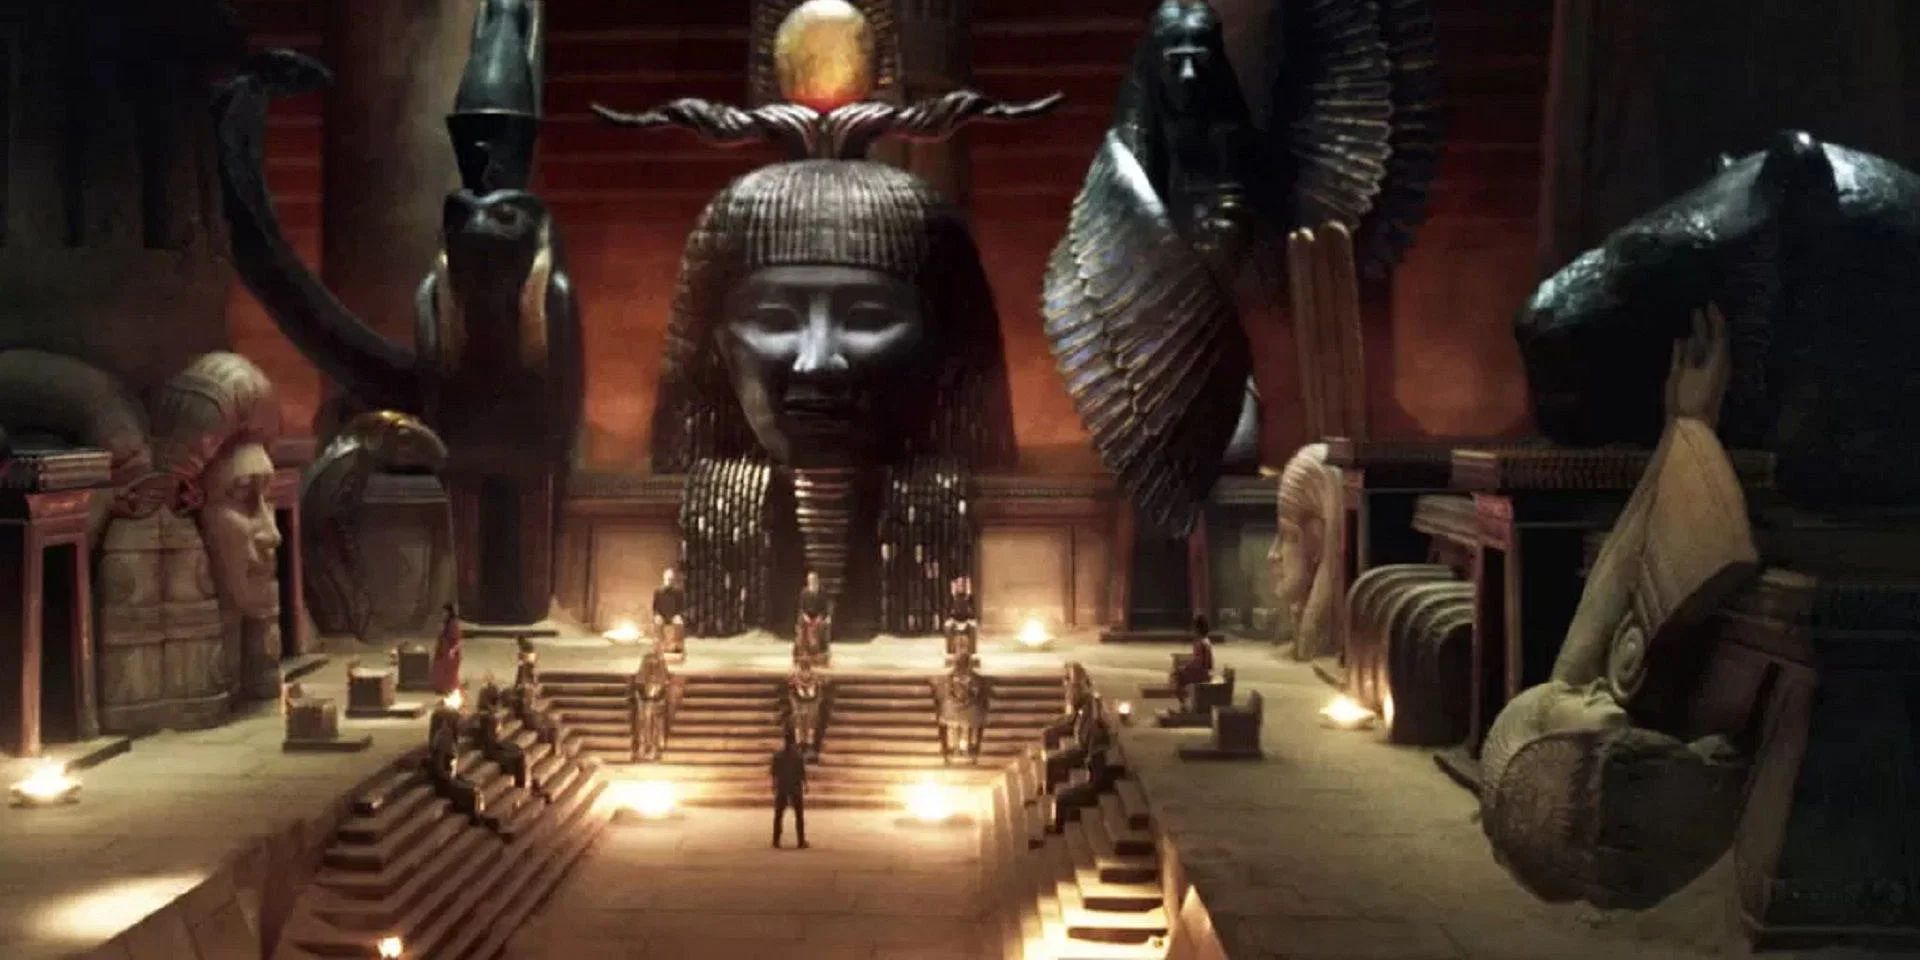 The Egyptian pantheon, or Ennead, from Disney+'s Moon Knight